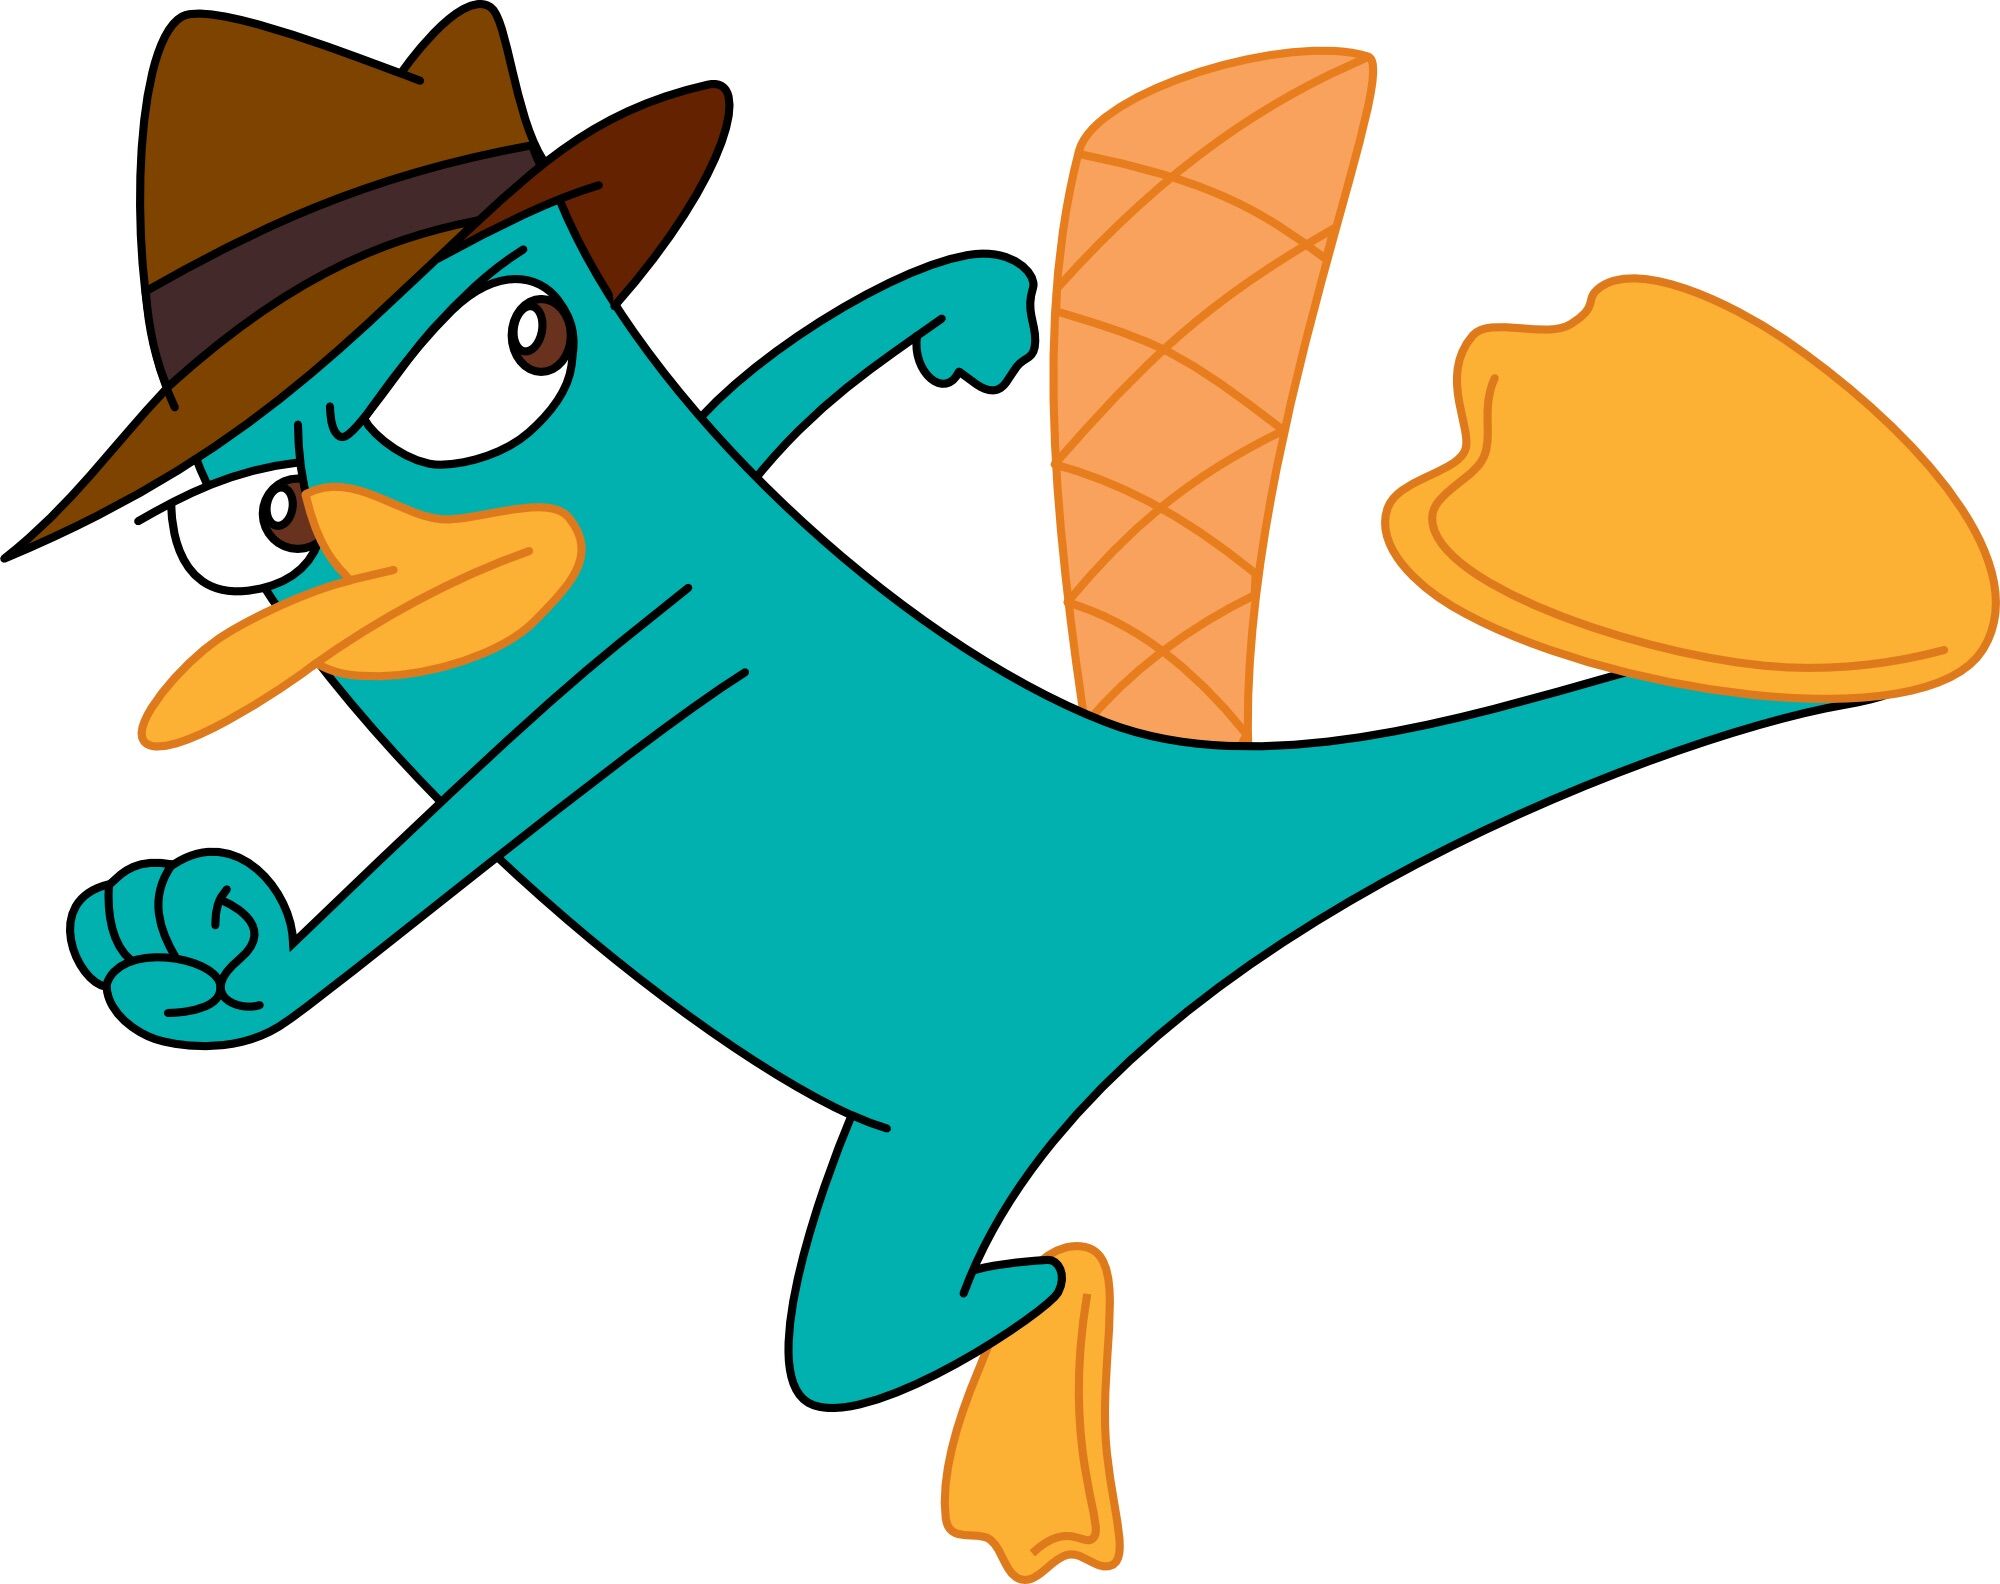 agent p perry the platypus